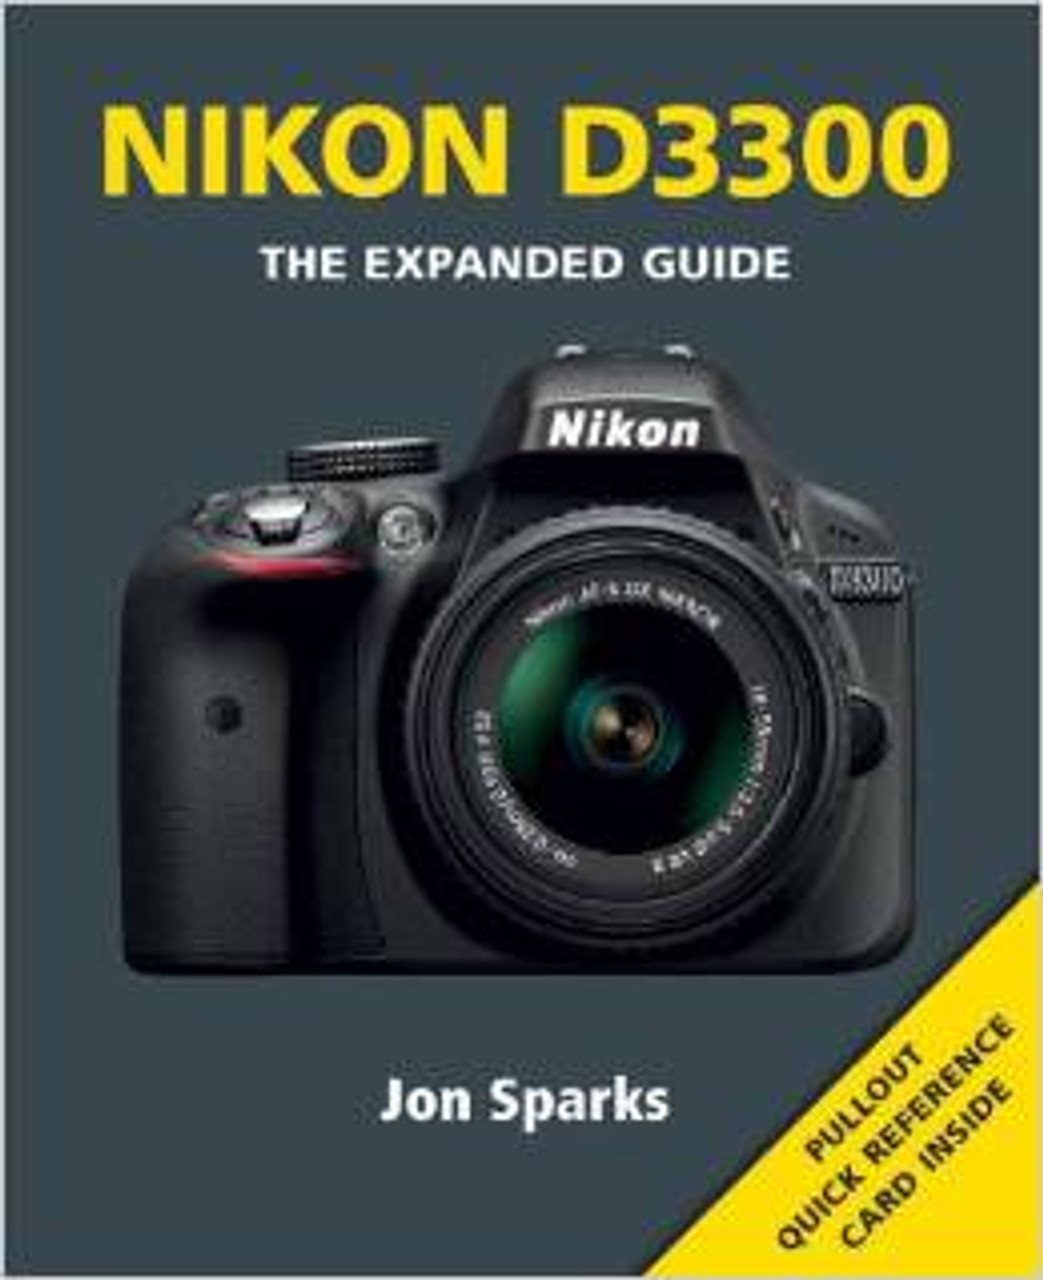 The Nikon D3300 Expanded Guide by Jon Sparks at Acephoto.net